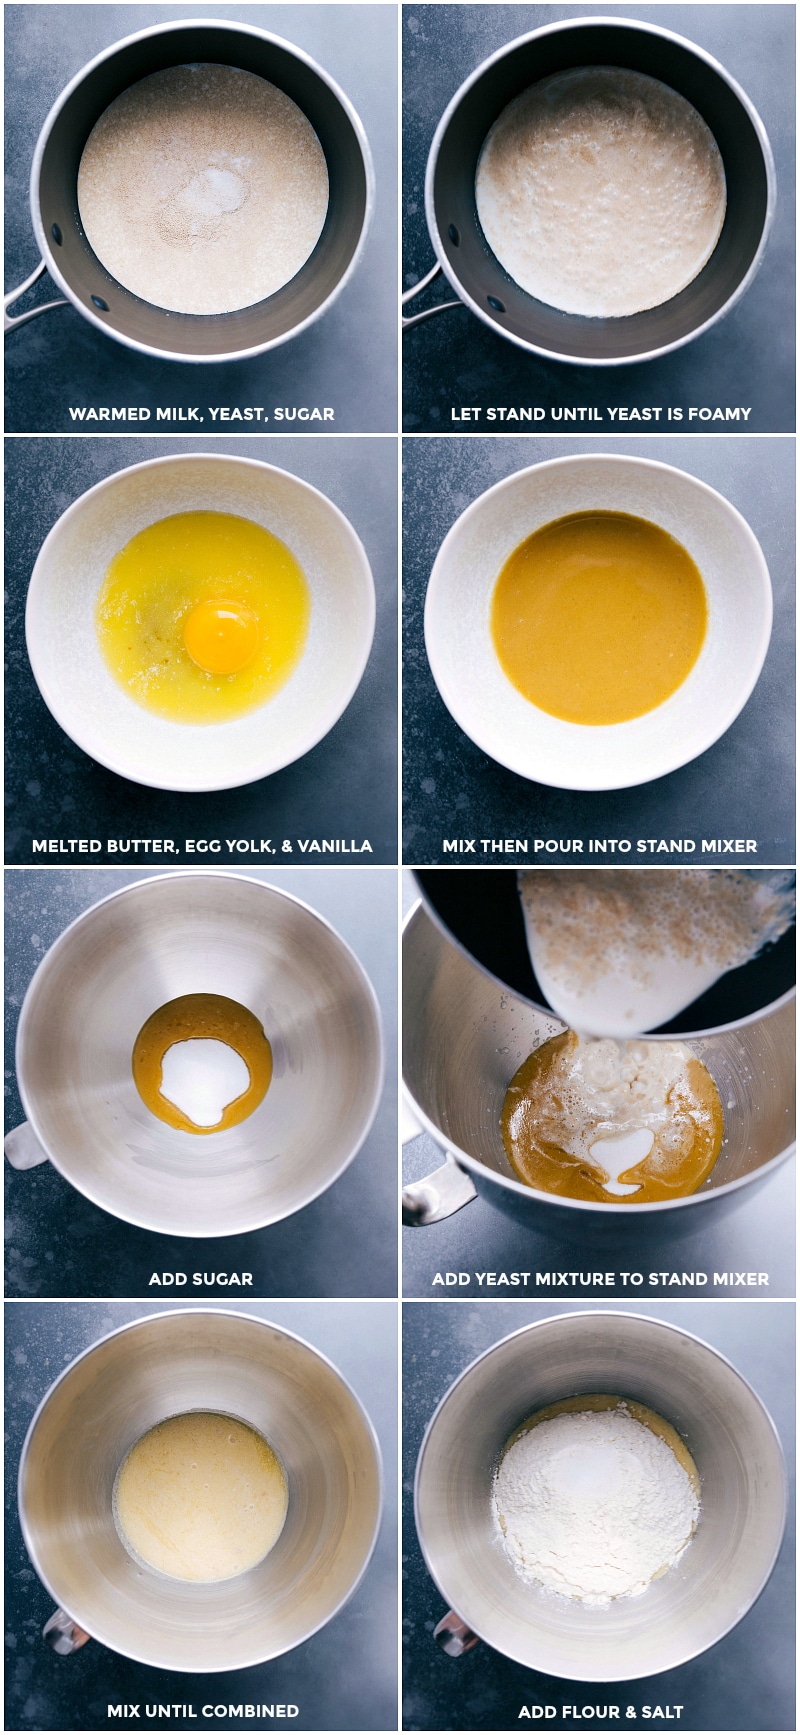 Process shots-- images of the milk, yeast, and sugar being mixed together in a pot over heat, then being added to the stand mixer, eggs, butter, and vanilla being added and it being mixed to combine. Then flour and salt being added